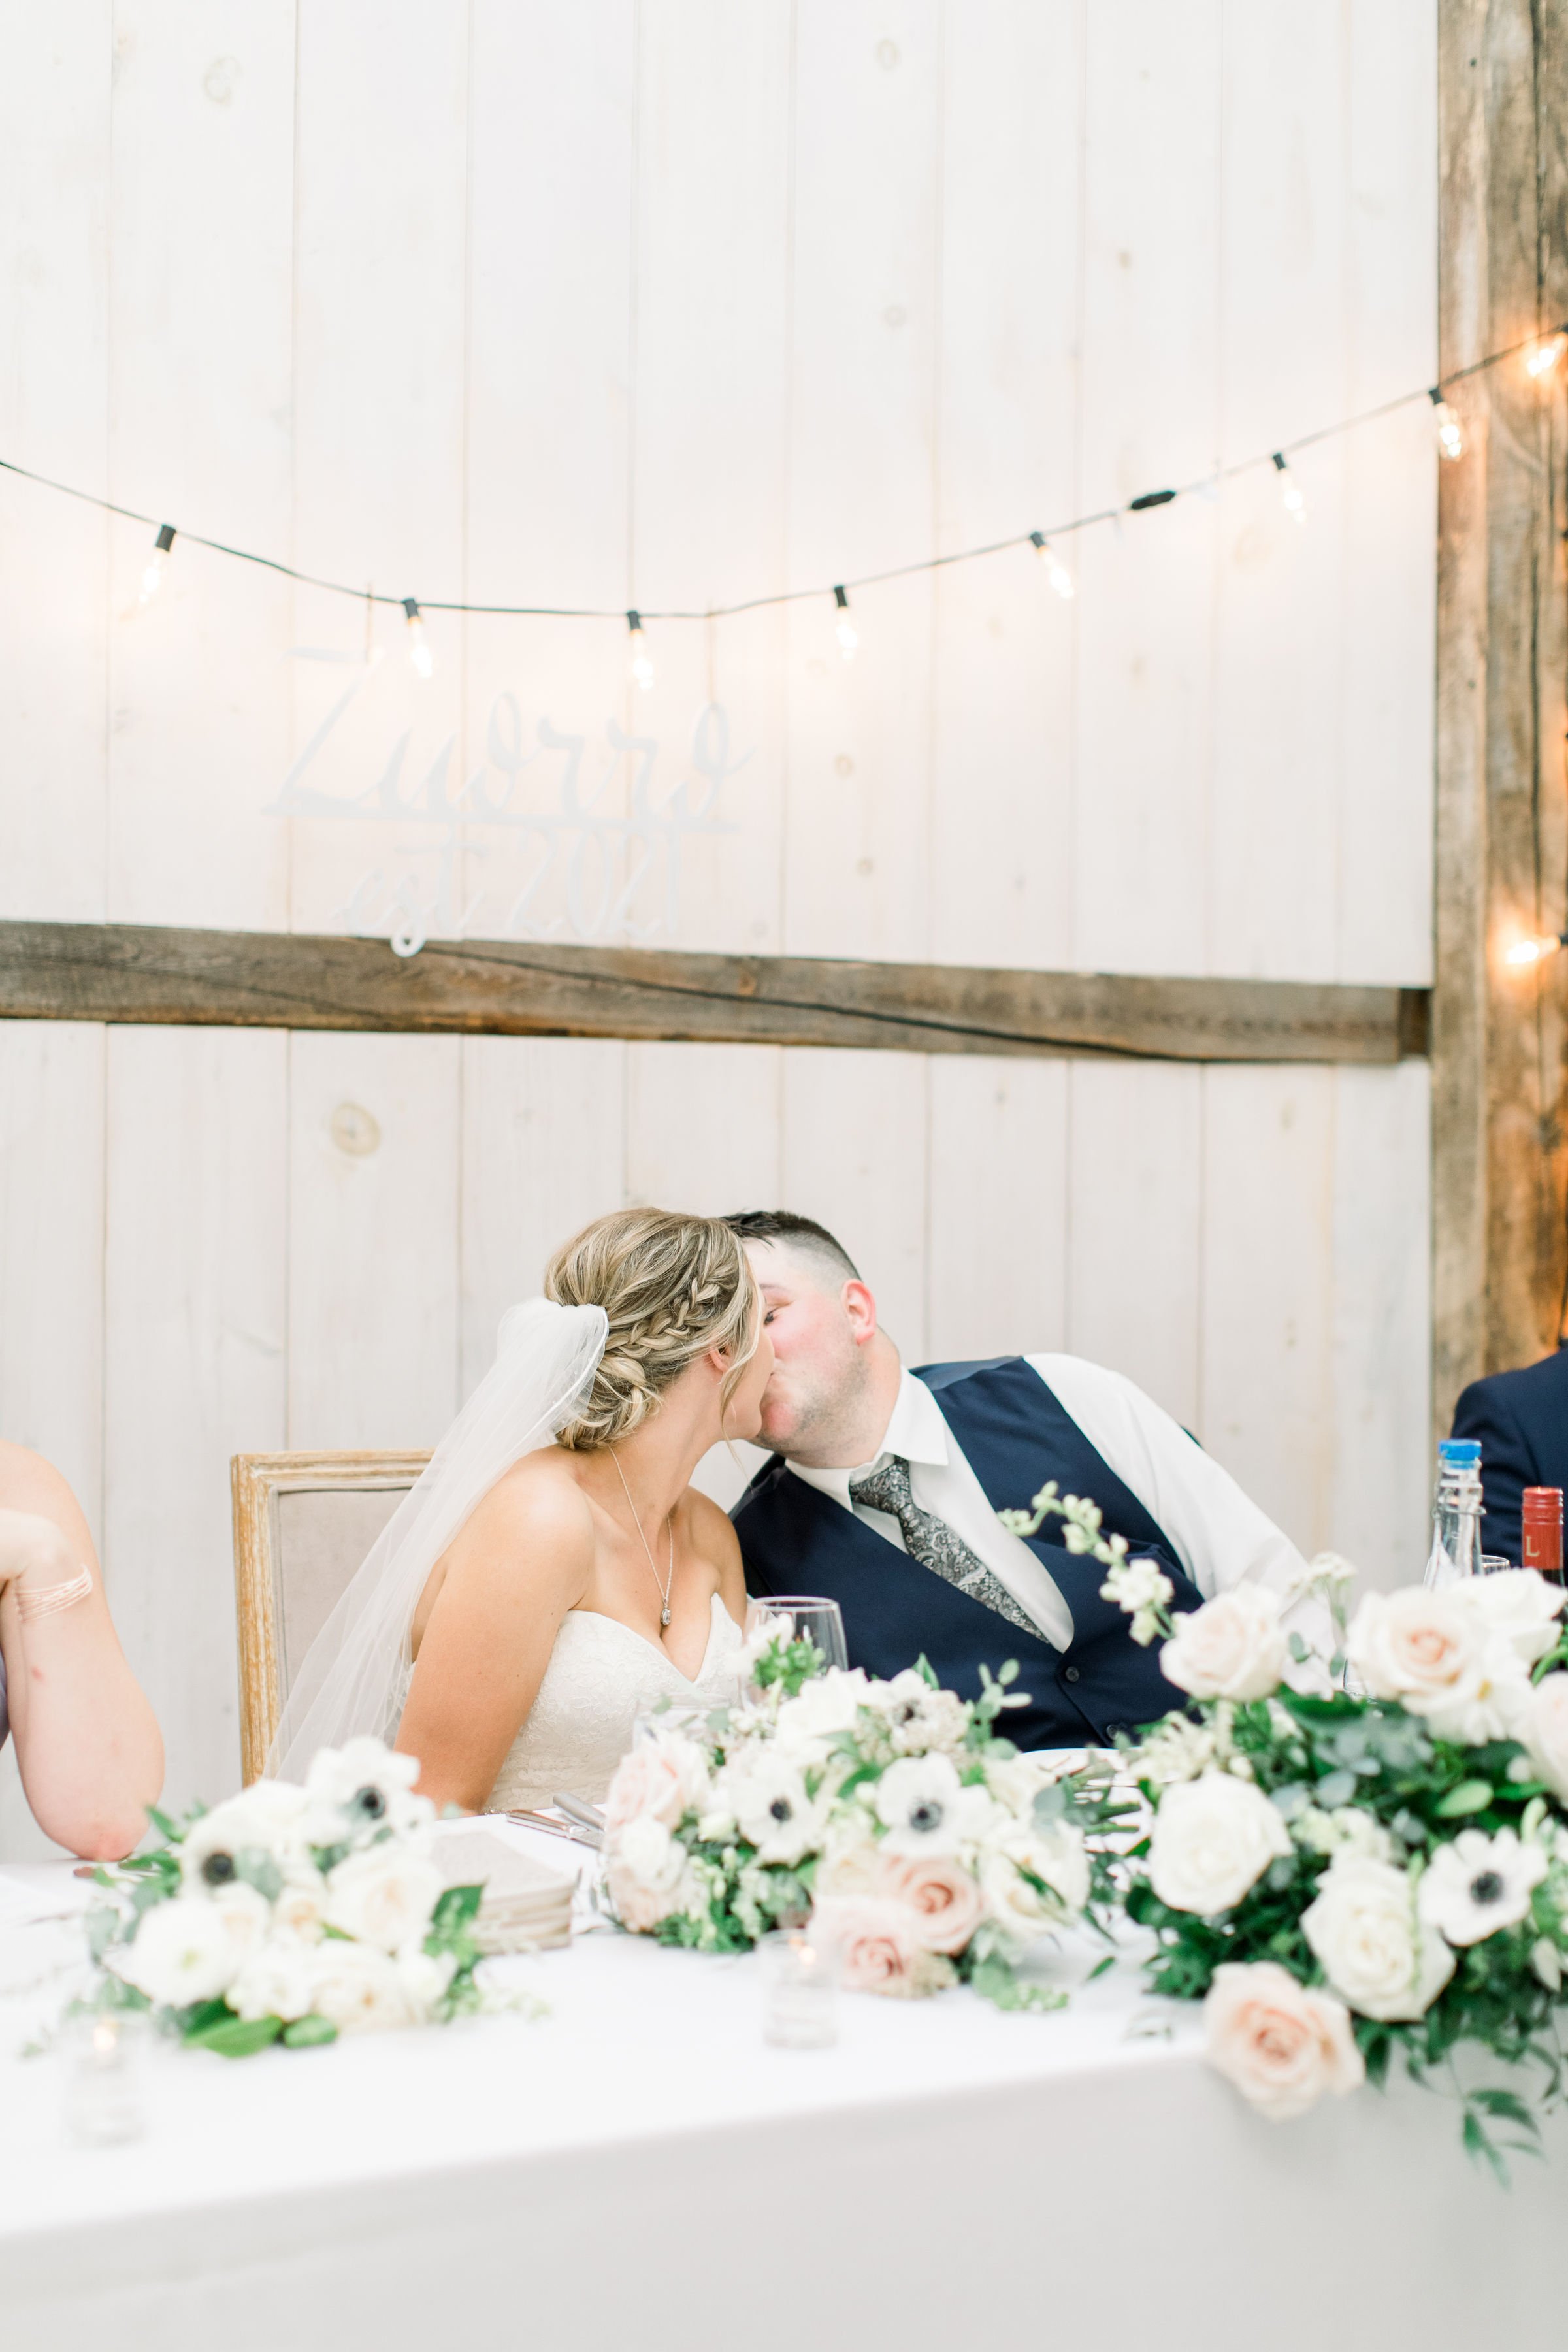  Chelsea Mason Photography captures the bride and groom kissing during the wedding luncheon. wedding luncheon kissing newlyweds #StonefieldEstates #Ontarioweddings #Chelseamasonphotography #Chelseamasonengagements #Ontarioweddingphotographers 